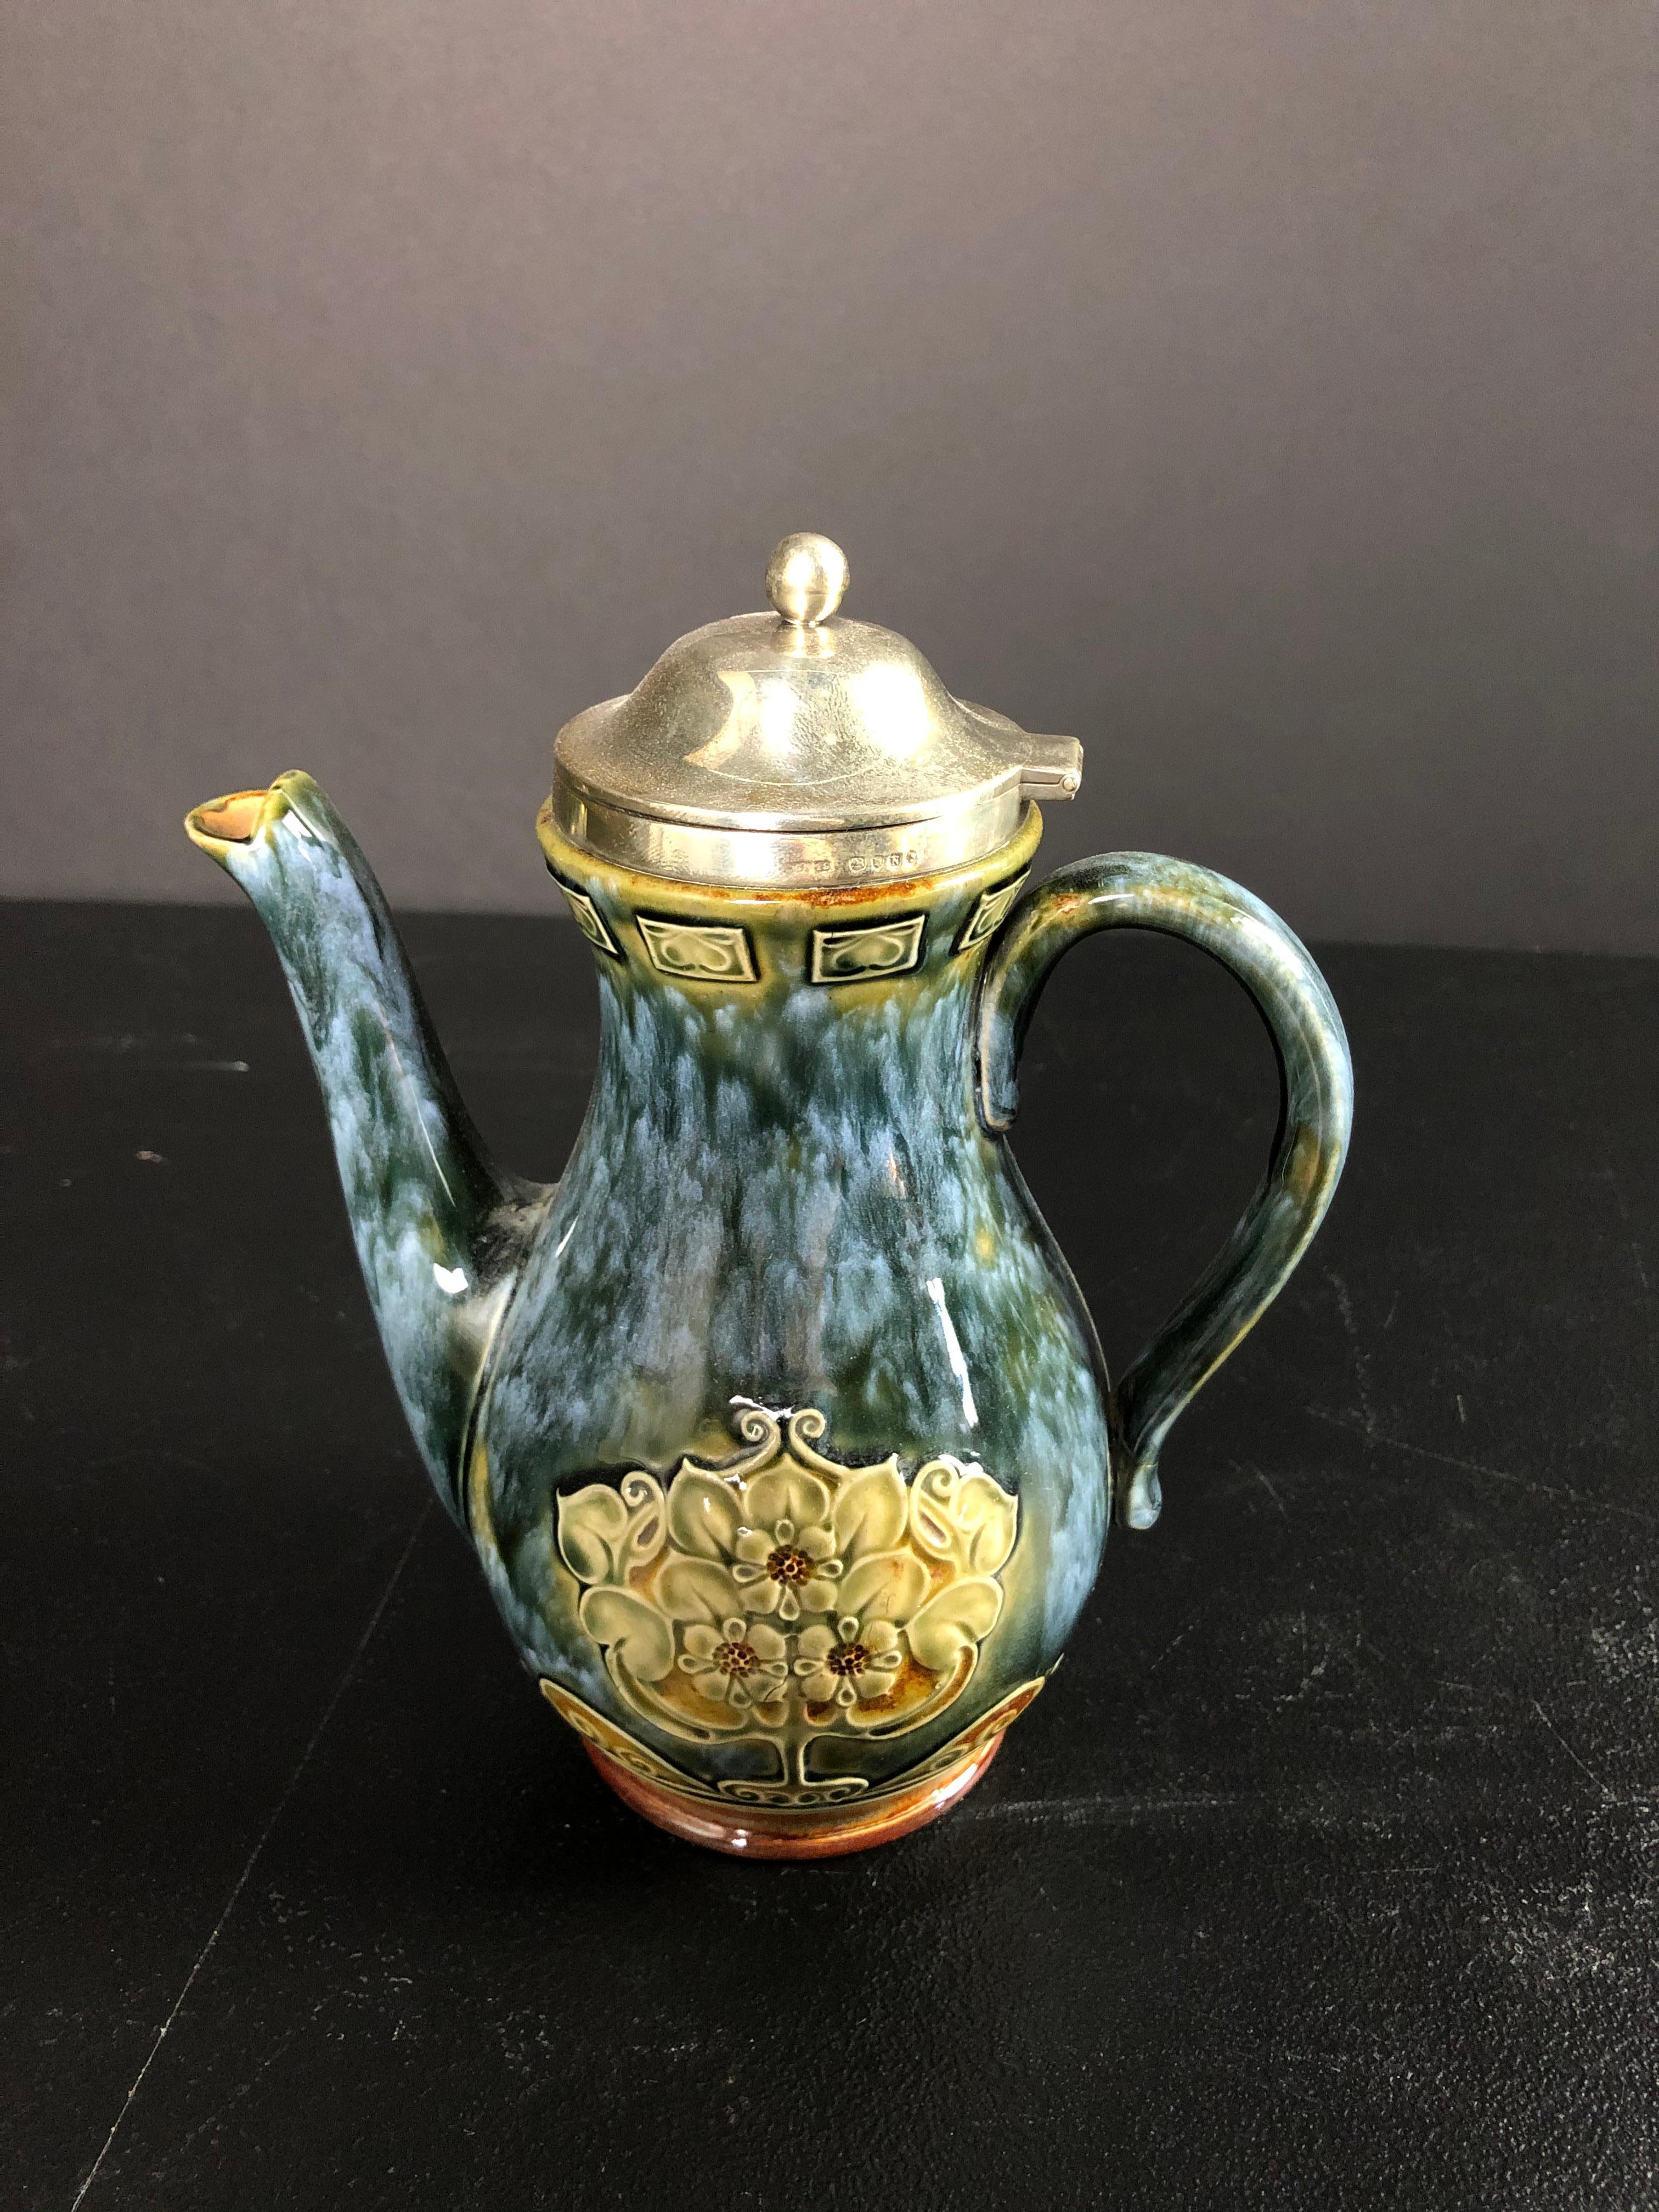 Art Nouveau sterling silver mounted and fully hallmarked Royal Doulton blue glazed lidded pitcher. 19th century petite pitcher with raised Art Nouveau design.
  